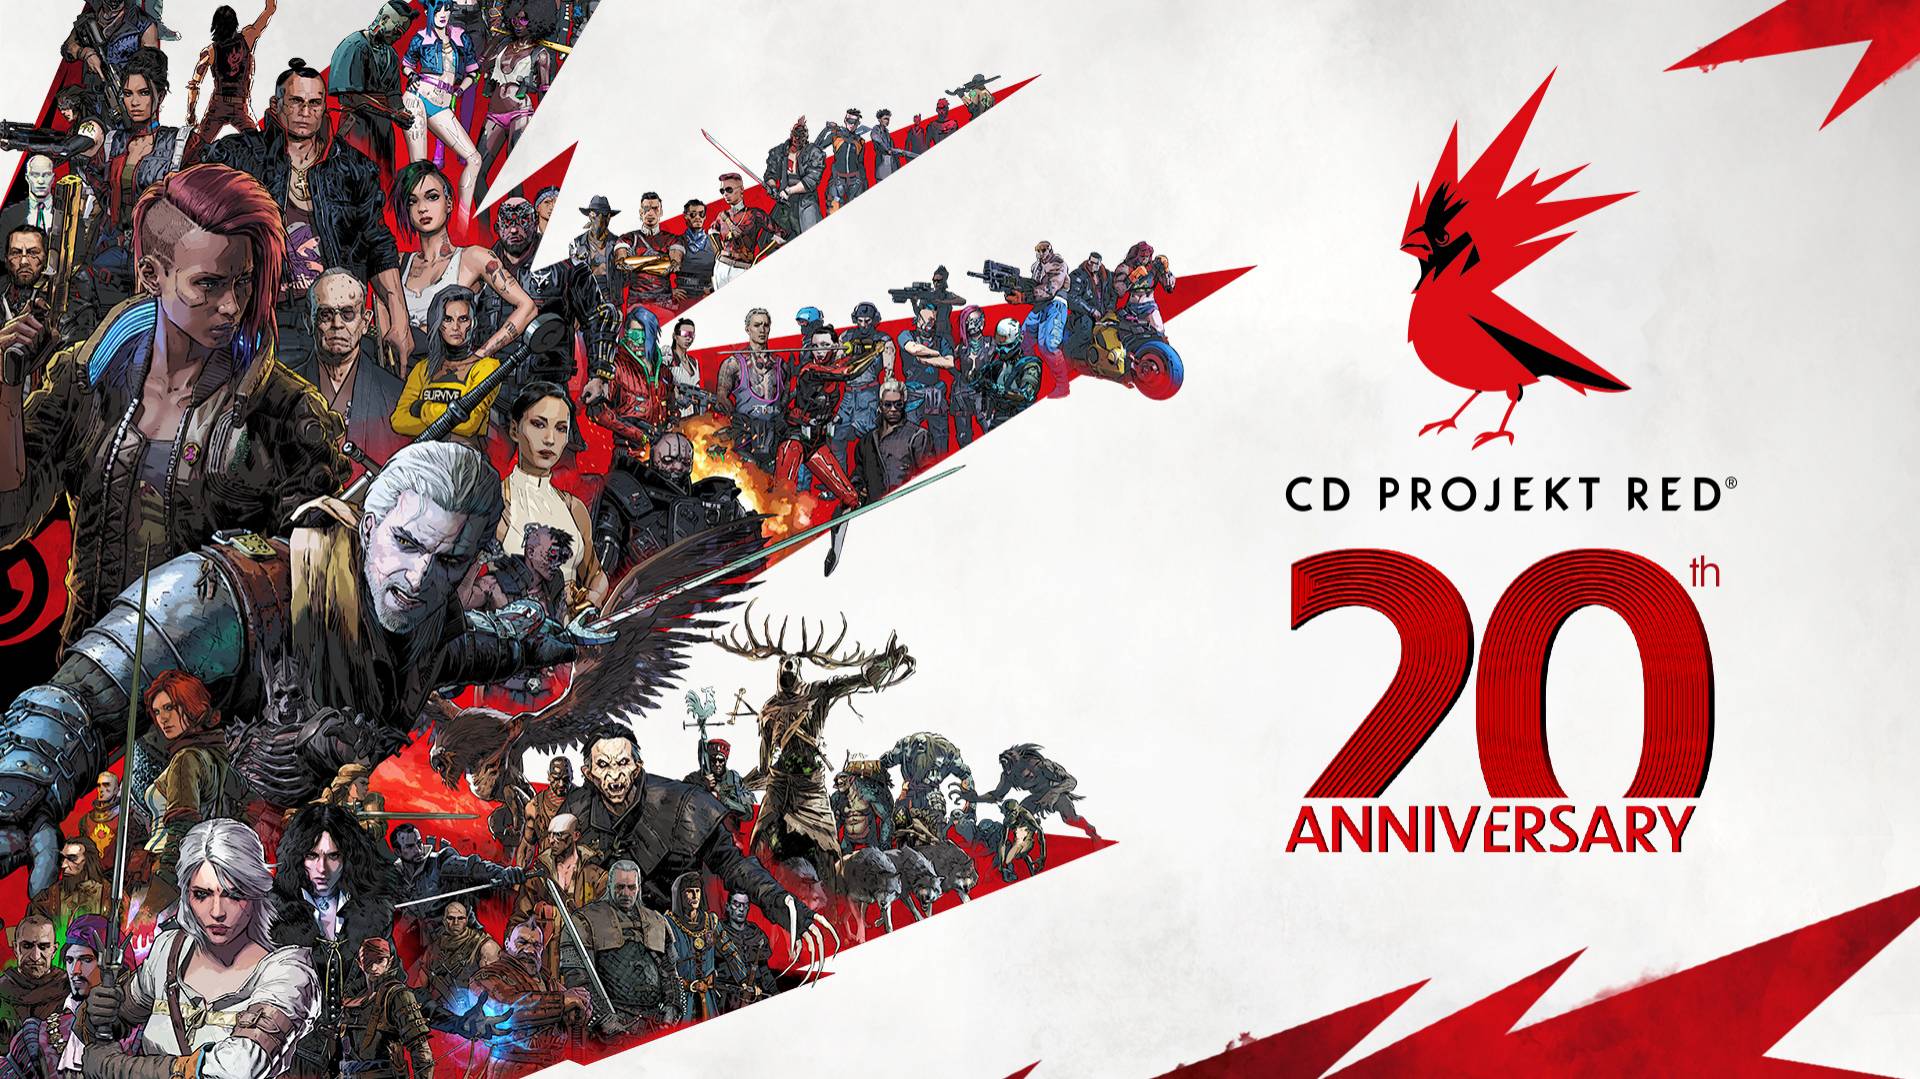 20 years of CD PROJEKT RED! - Cyberpunk — from the creators of The Witcher 3: Wild Hunt